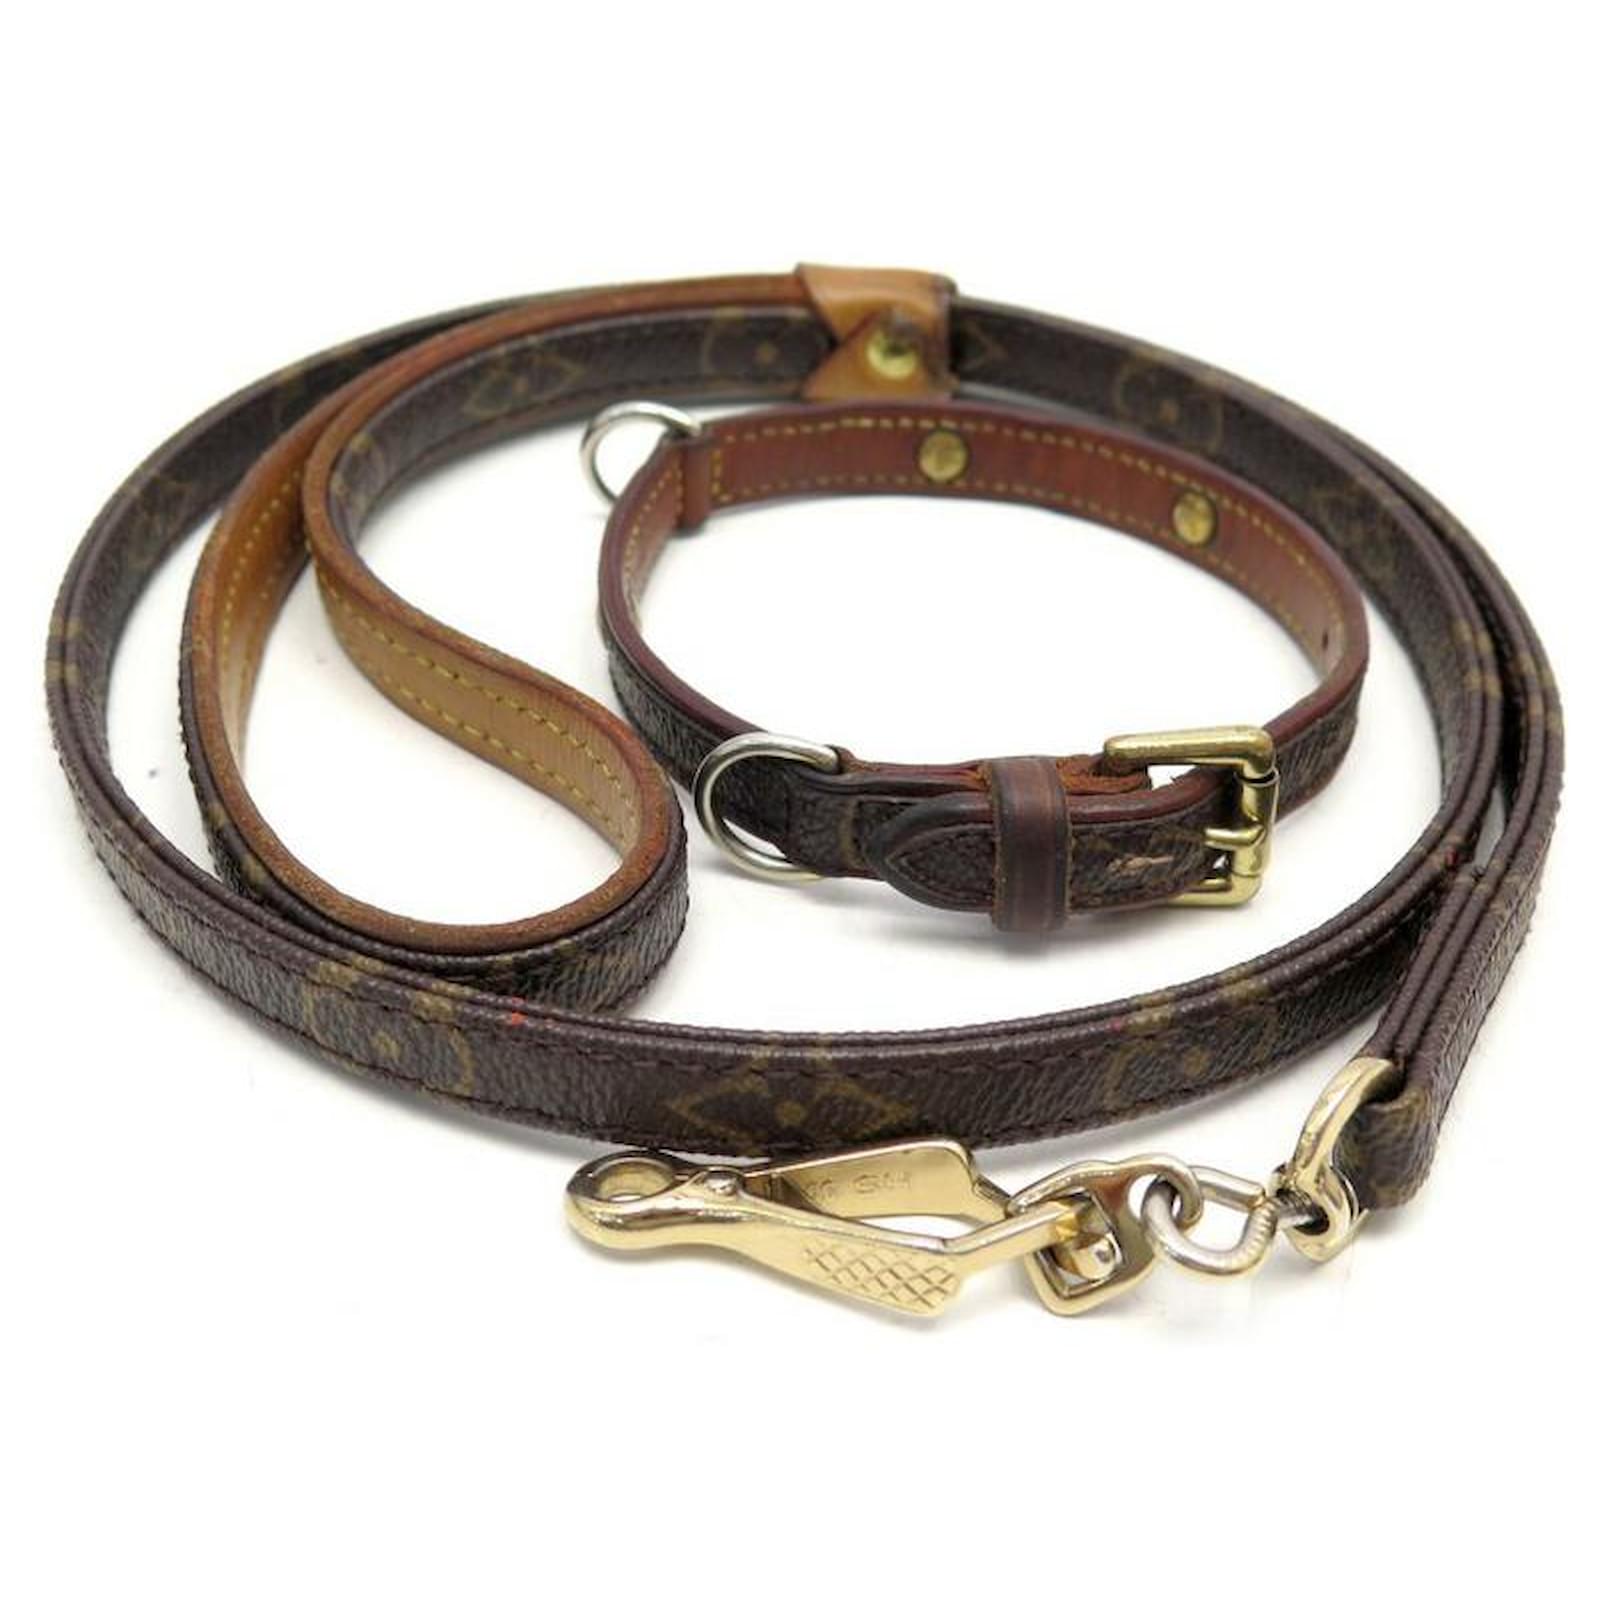 Brand New Louis Vuitton Dog Collar and Leash  Louis vuitton dog collar Dog  collar Dog accesories